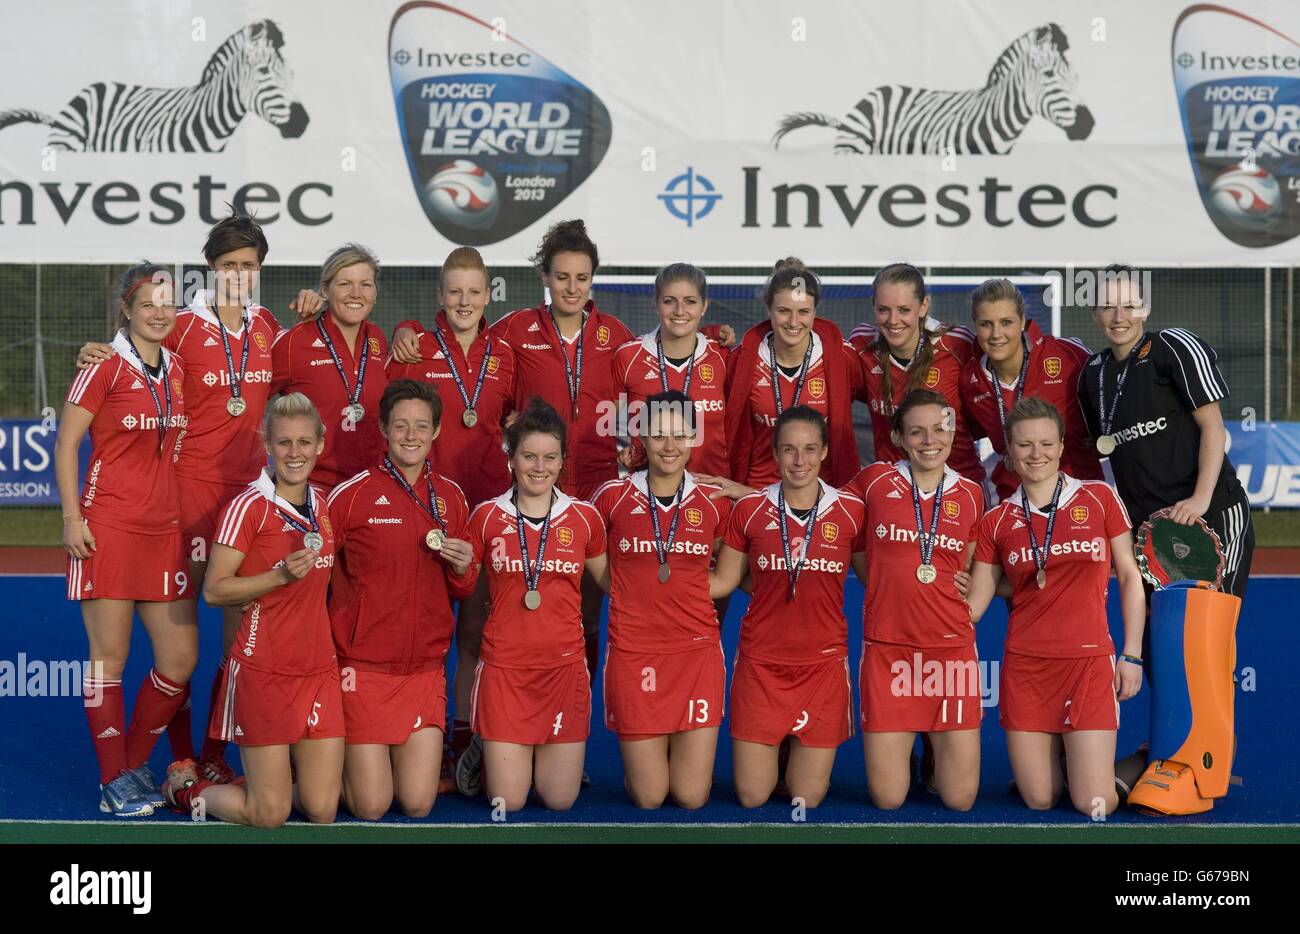 England's players after finishing second in the final during the Investec World League Semi Finals, Chiswick. Stock Photo